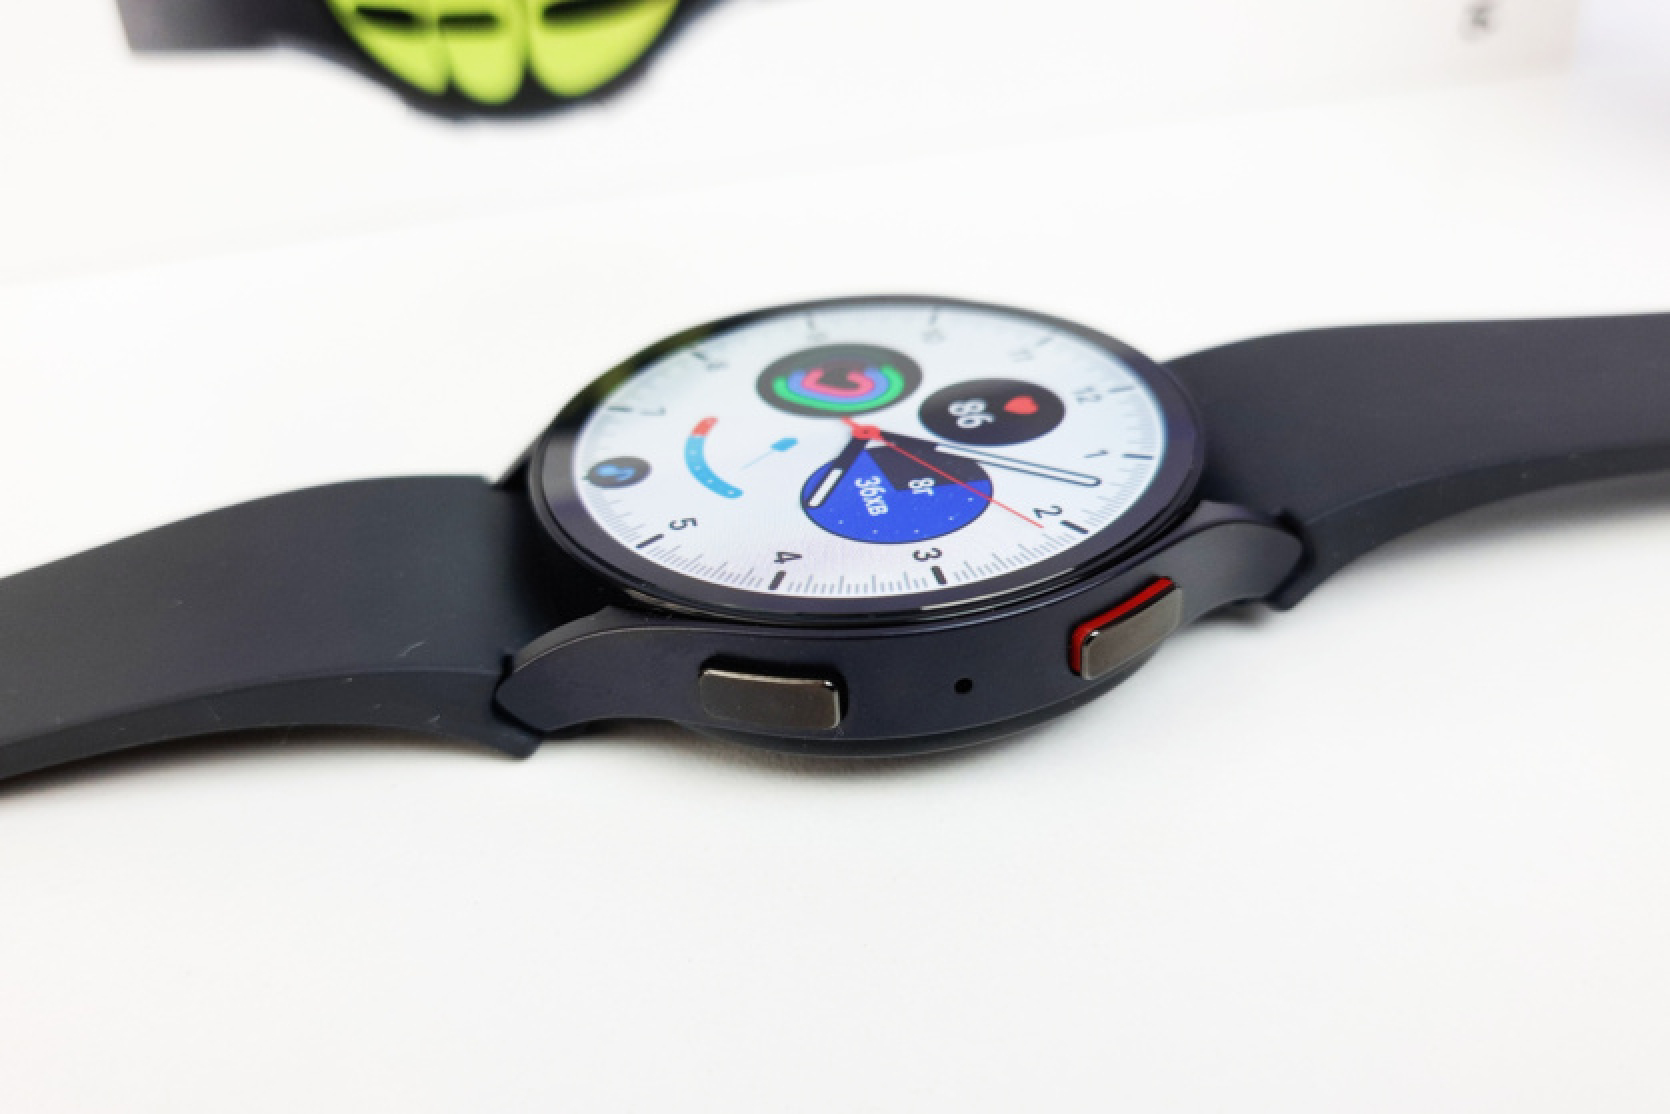 Samsung Galaxy Watch FE "flashed" in IMEI database - will be available worldwide